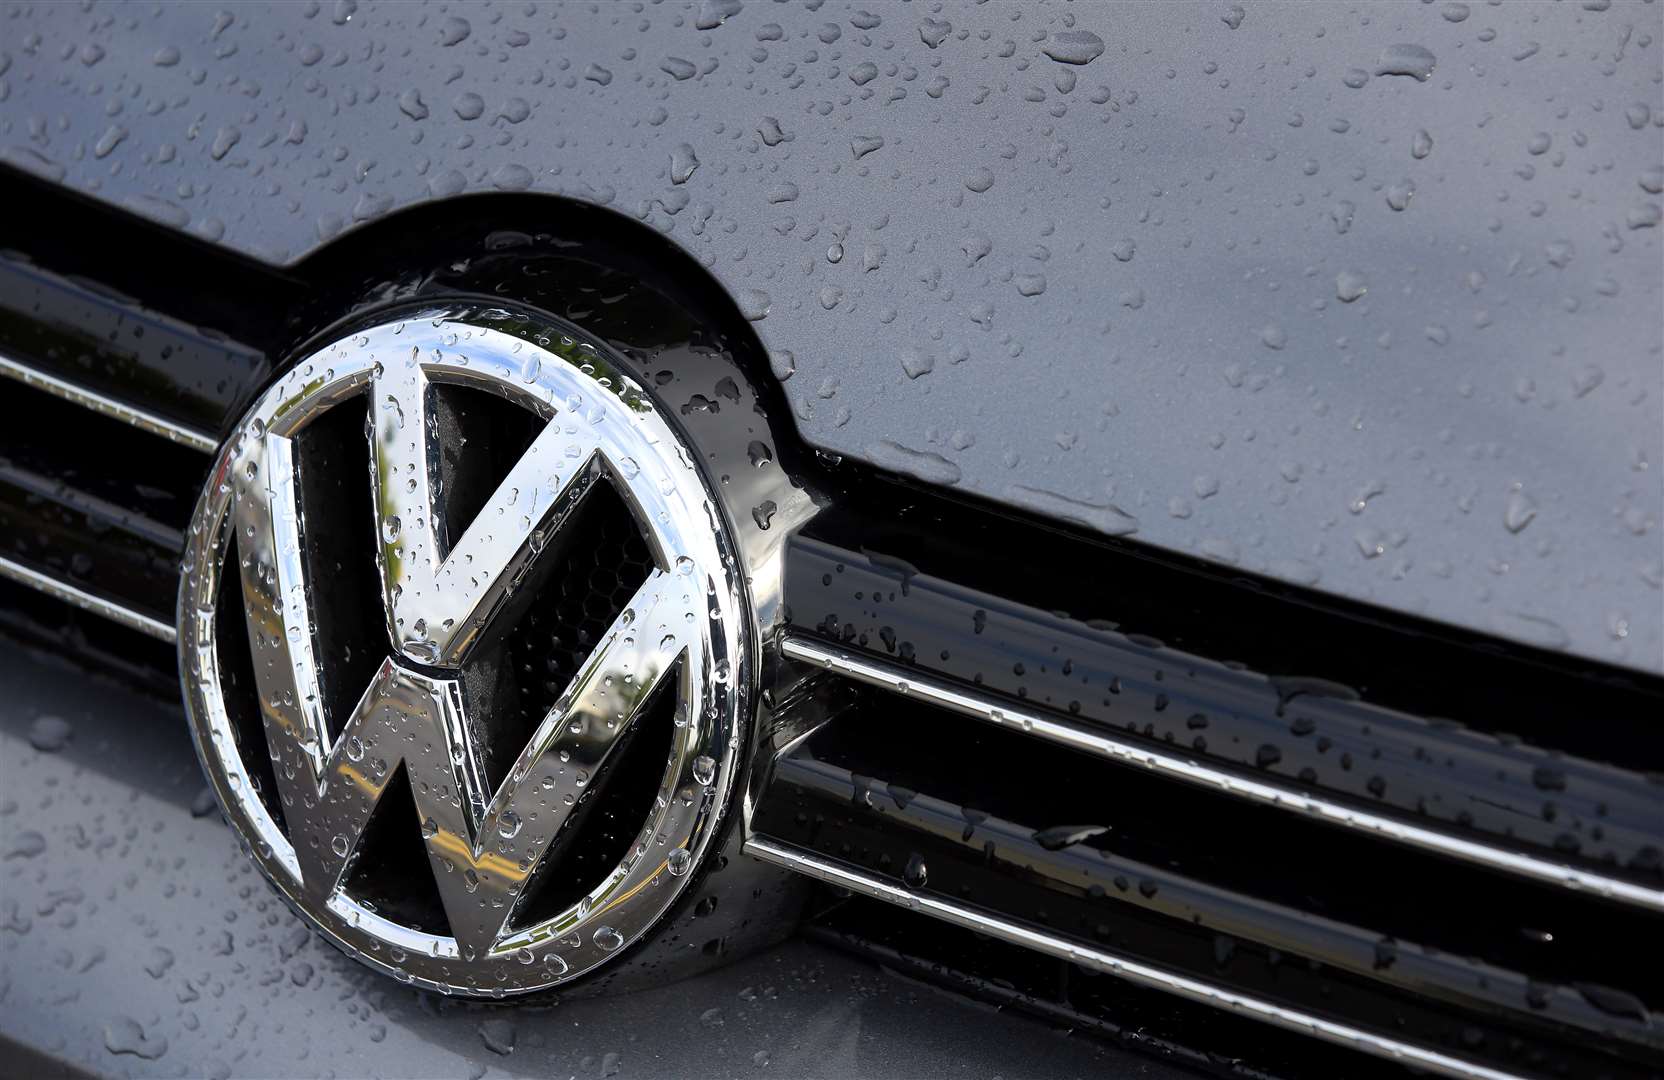 A VW spokeswoman said the company was ‘considering carefully’ the grounds on which it may seek to appeal the decision (GaretH Fuller/PA)